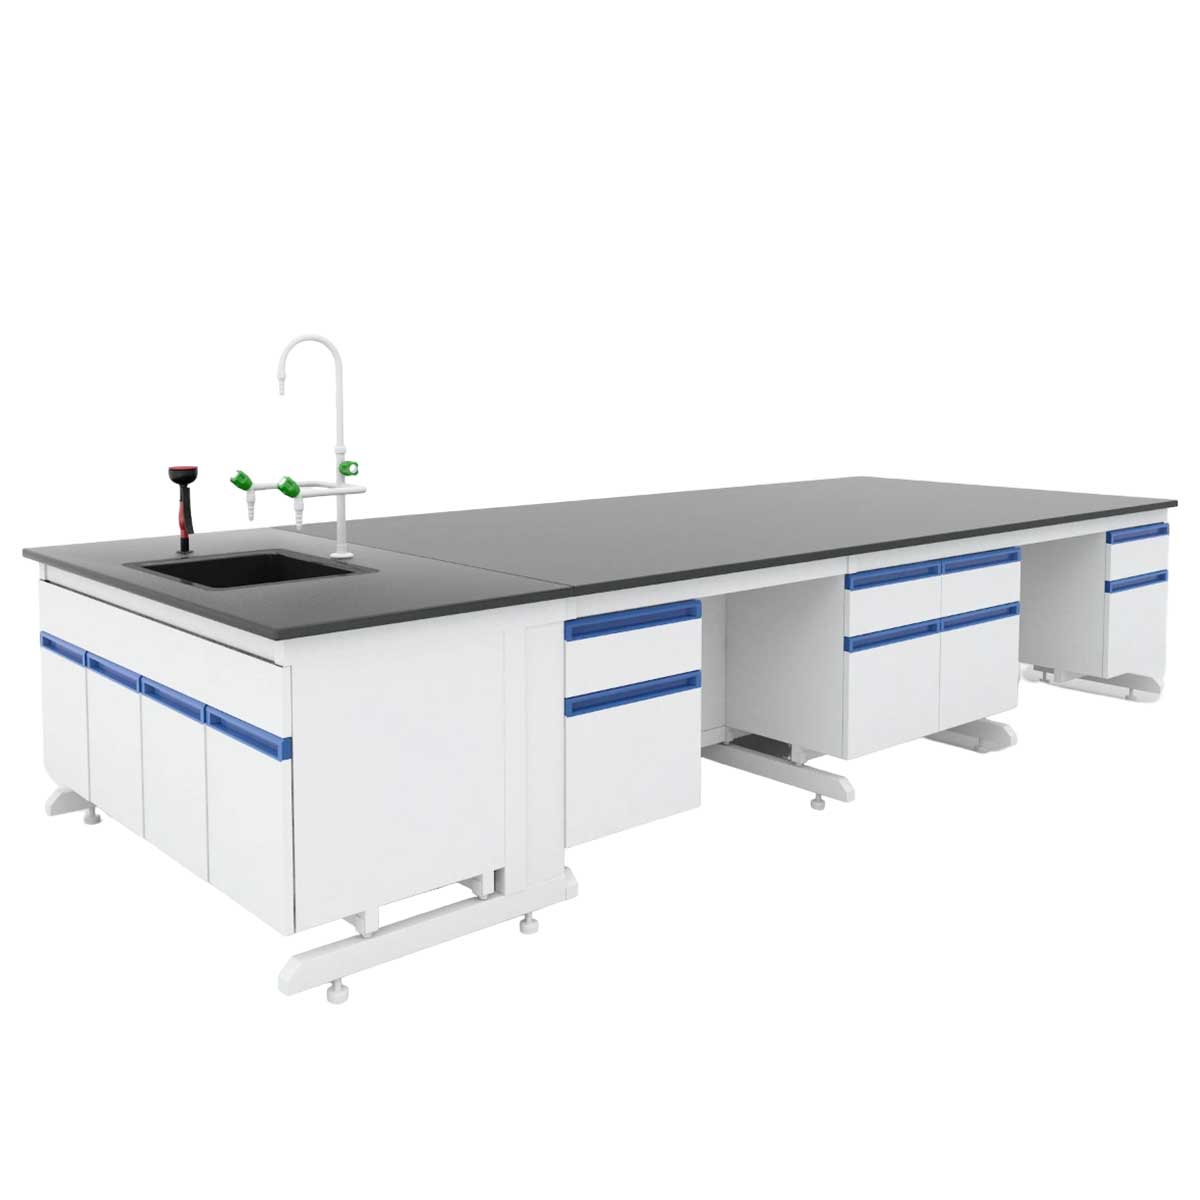 Physics Lab Furniture Manufacturers, Suppliers in South Extension Part 2